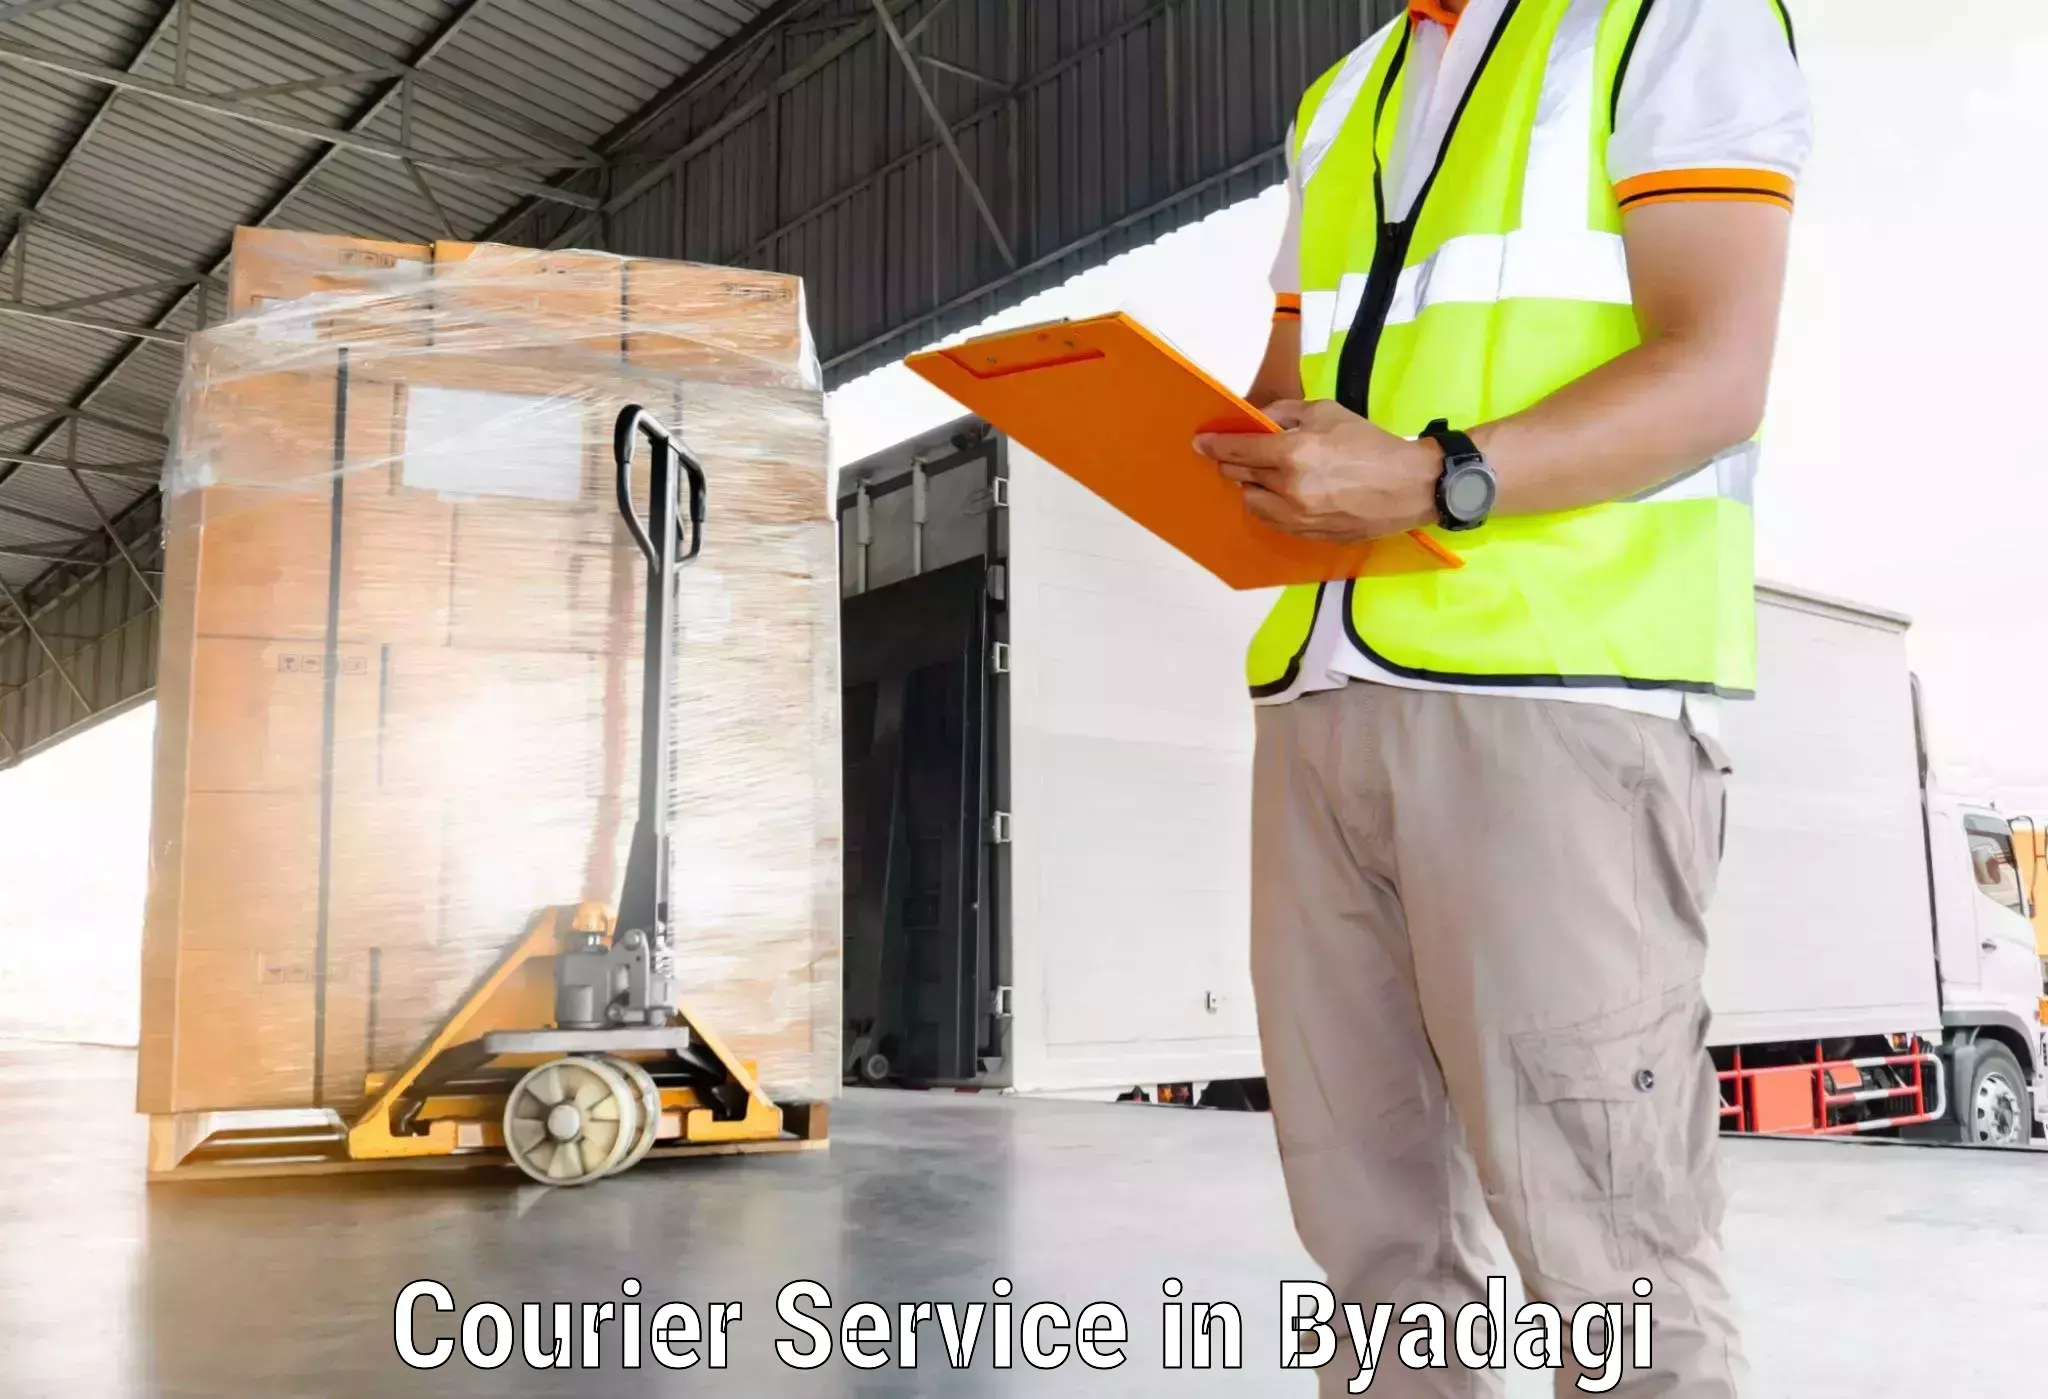 Same-day delivery options in Byadagi